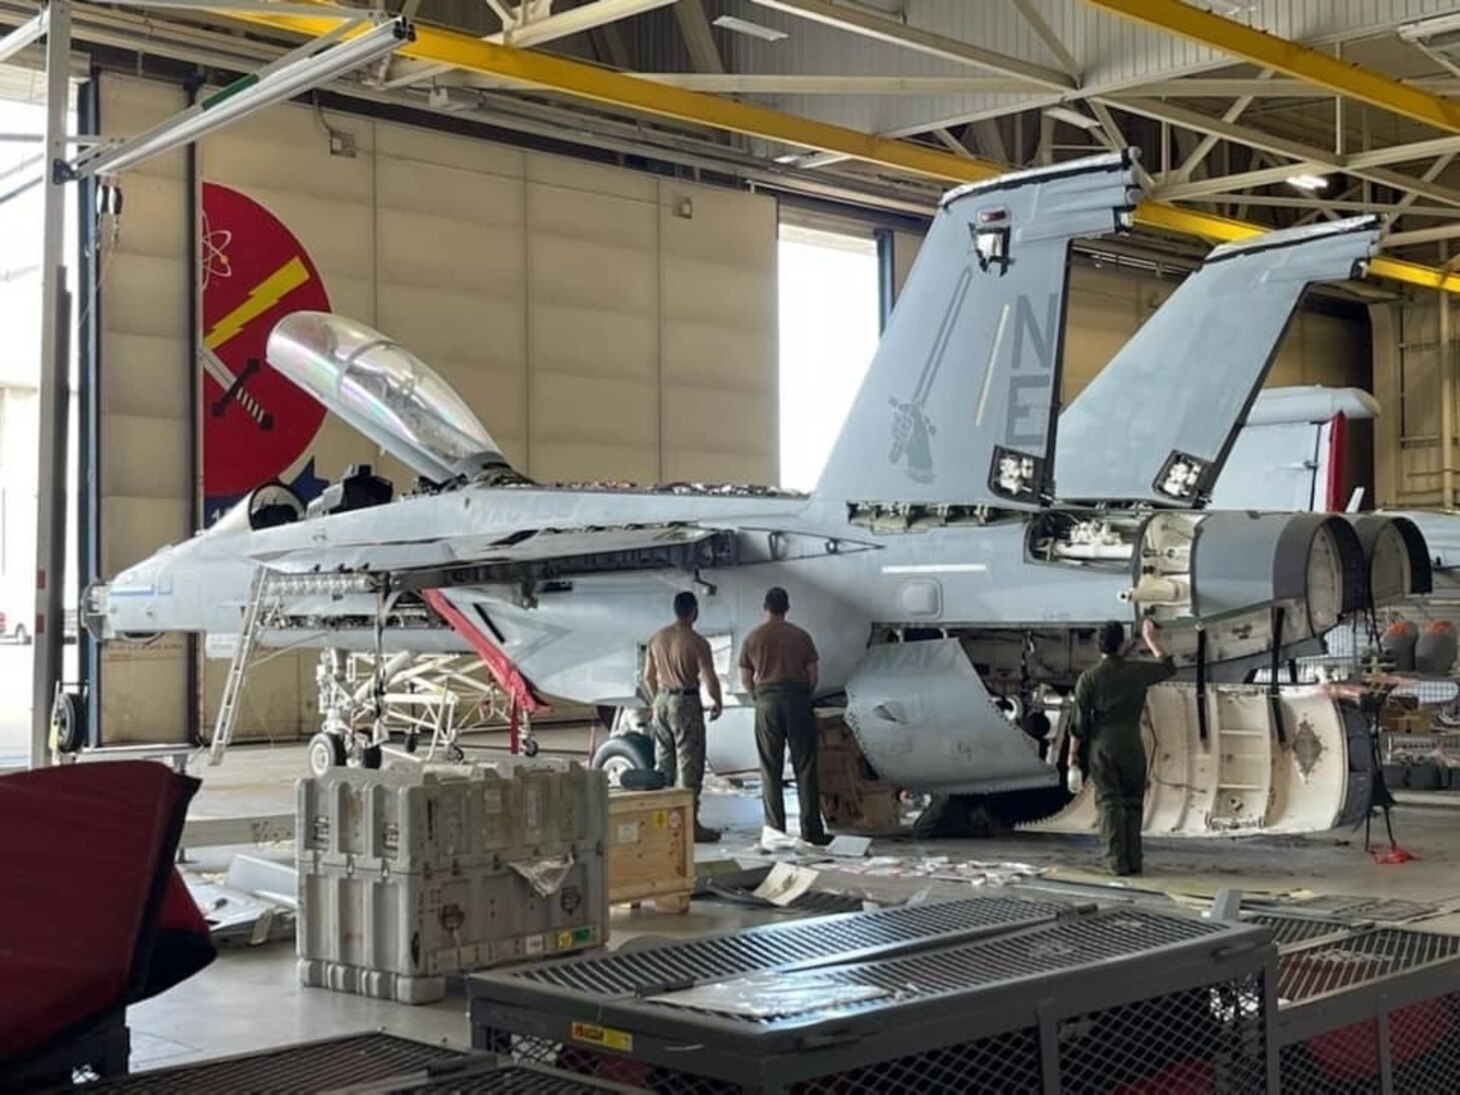 EA-18G Growler 515, assigned to Electronic Attack Squadron 129, is refurbished at Naval Air Station Whidbey Island.